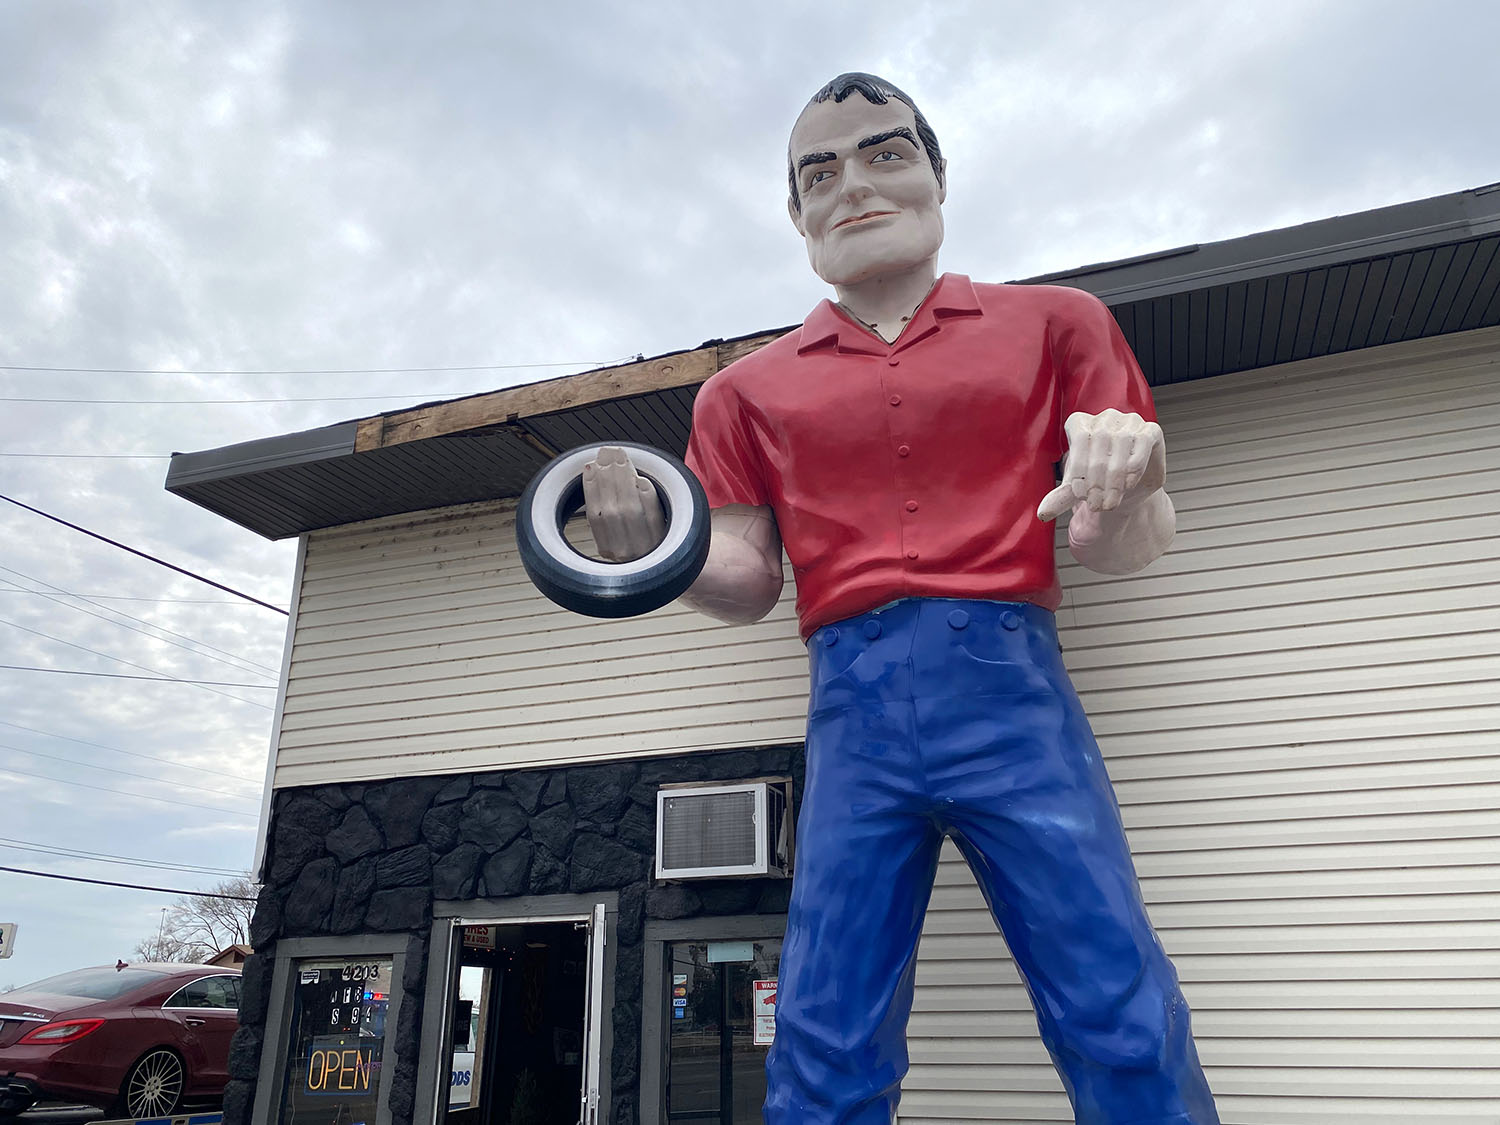 Muffler Man statue holding small tire in front of Brown's Tires in Wichita, Kansas